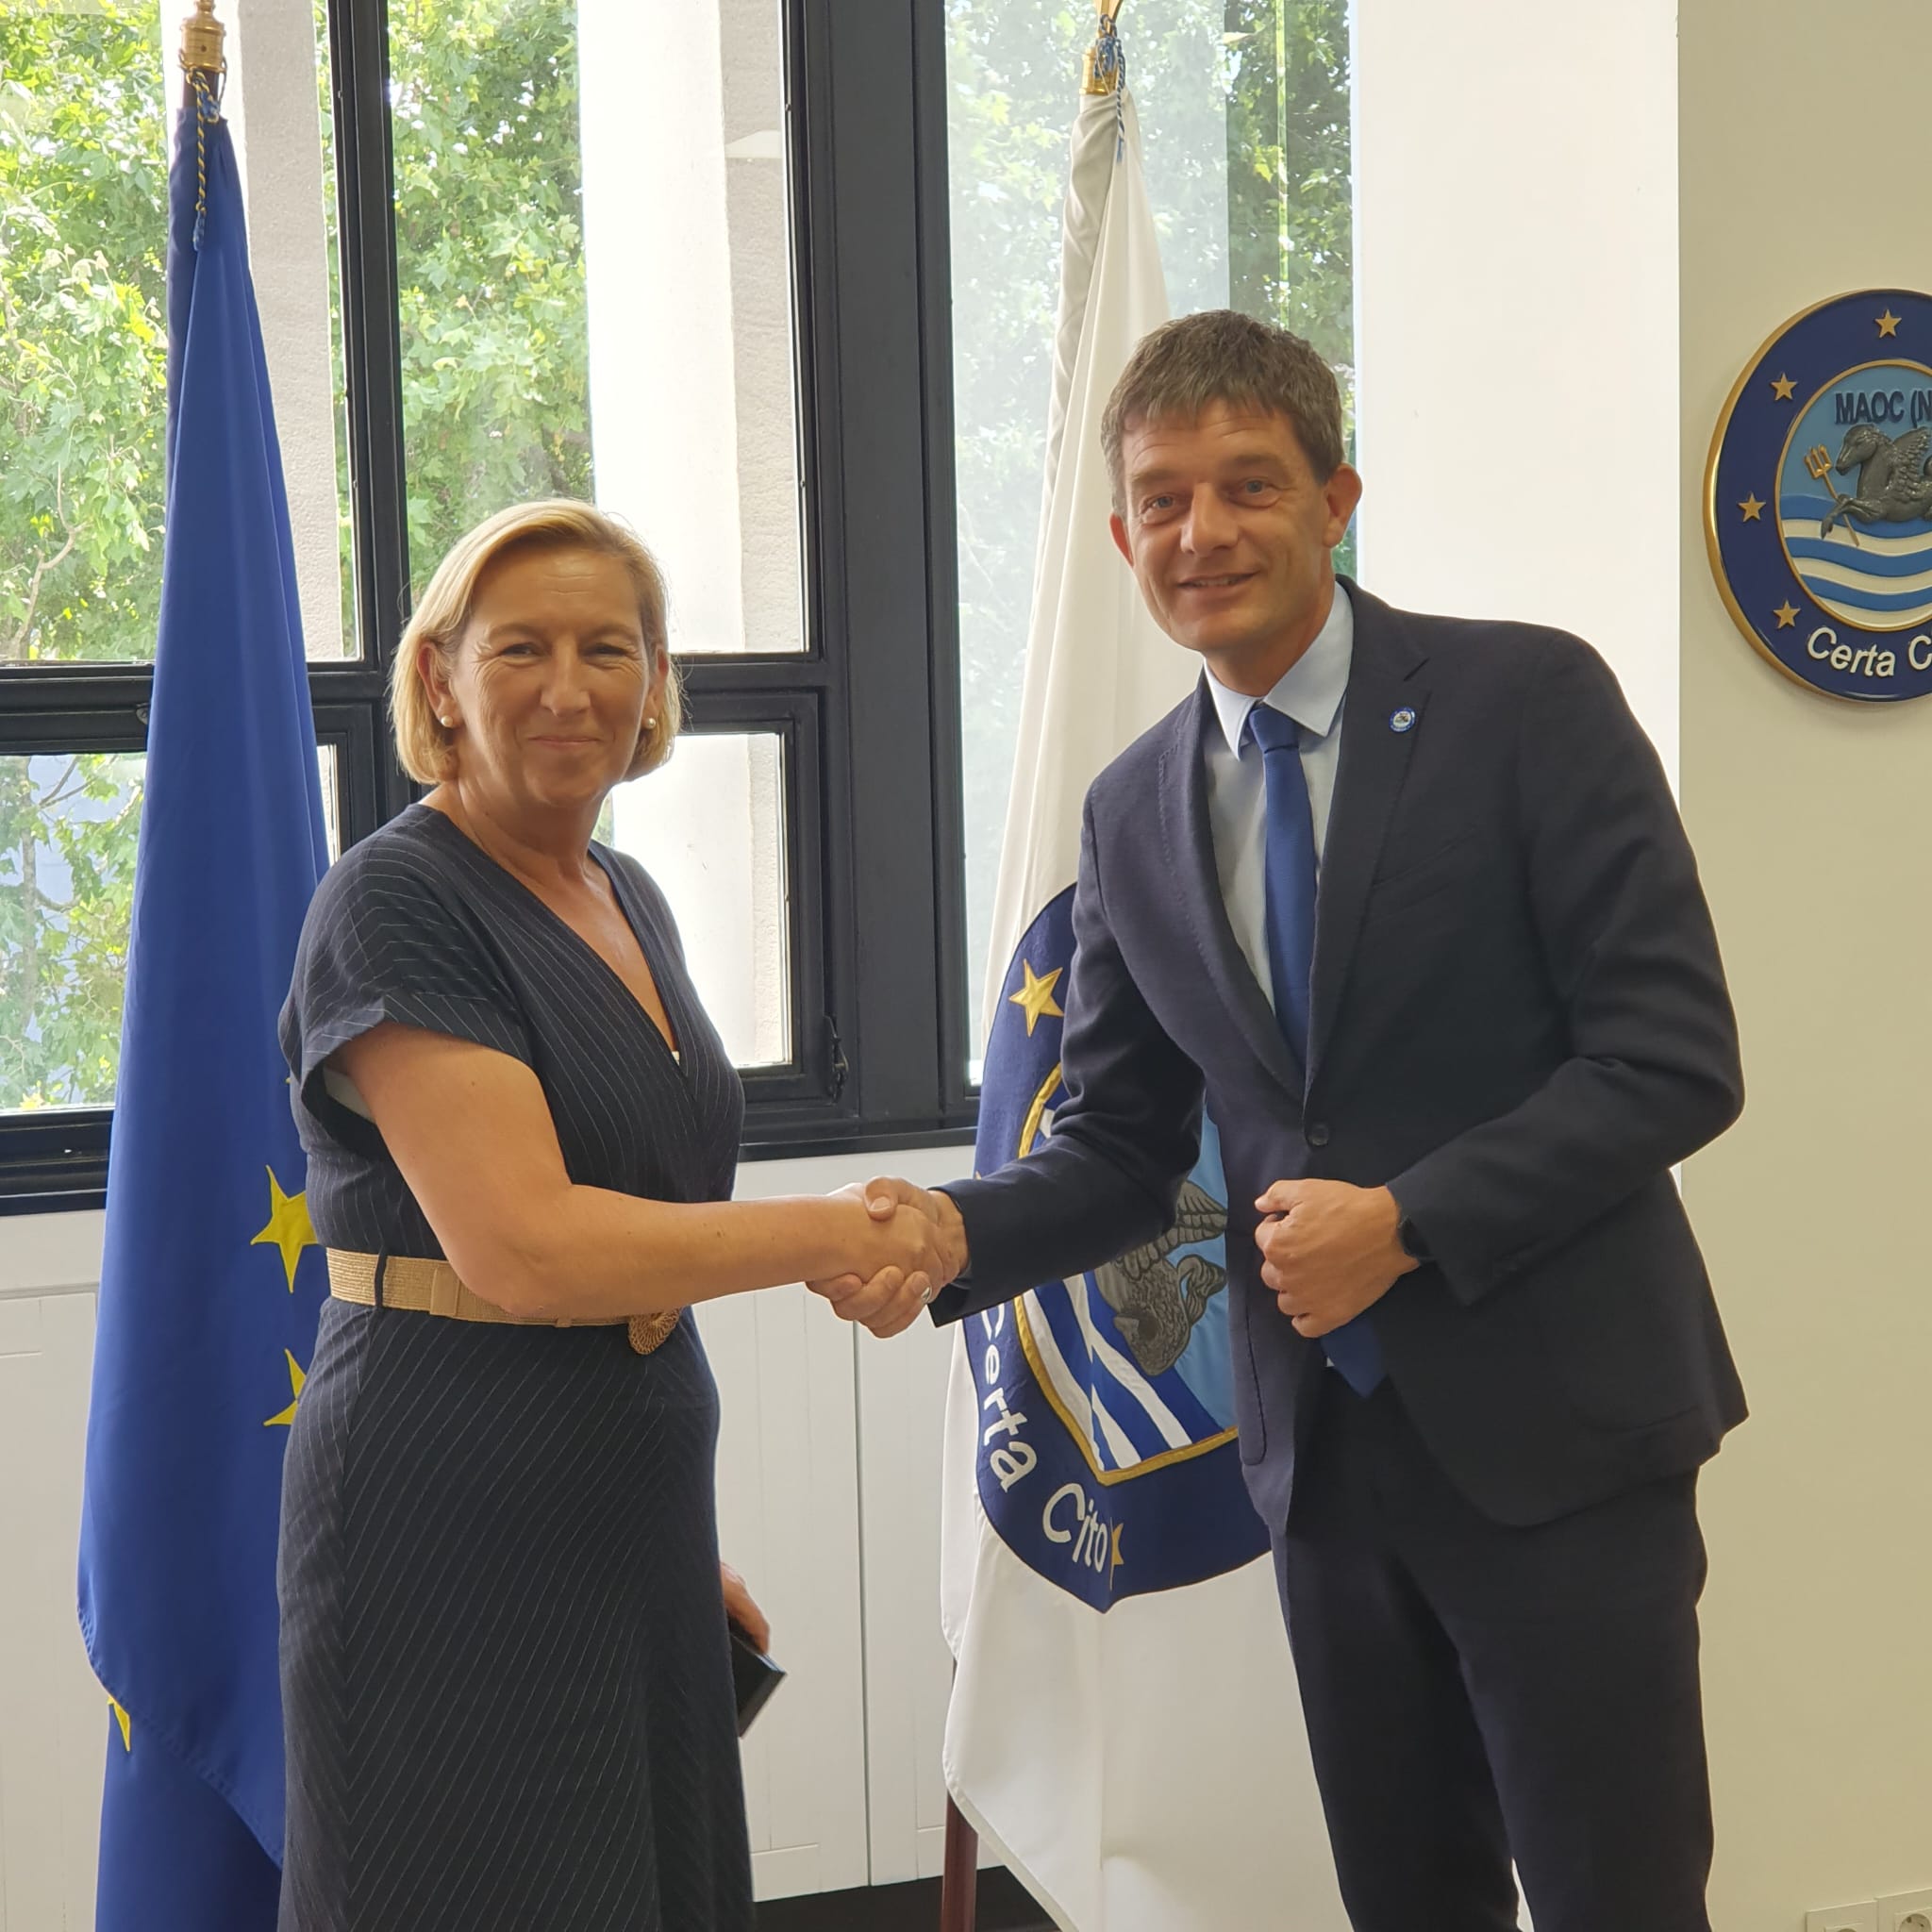 The Ambassador of France to Portugal, Hélène Farnaud-Defromont, is received by the Executive Director at the Centre’s Headquarters